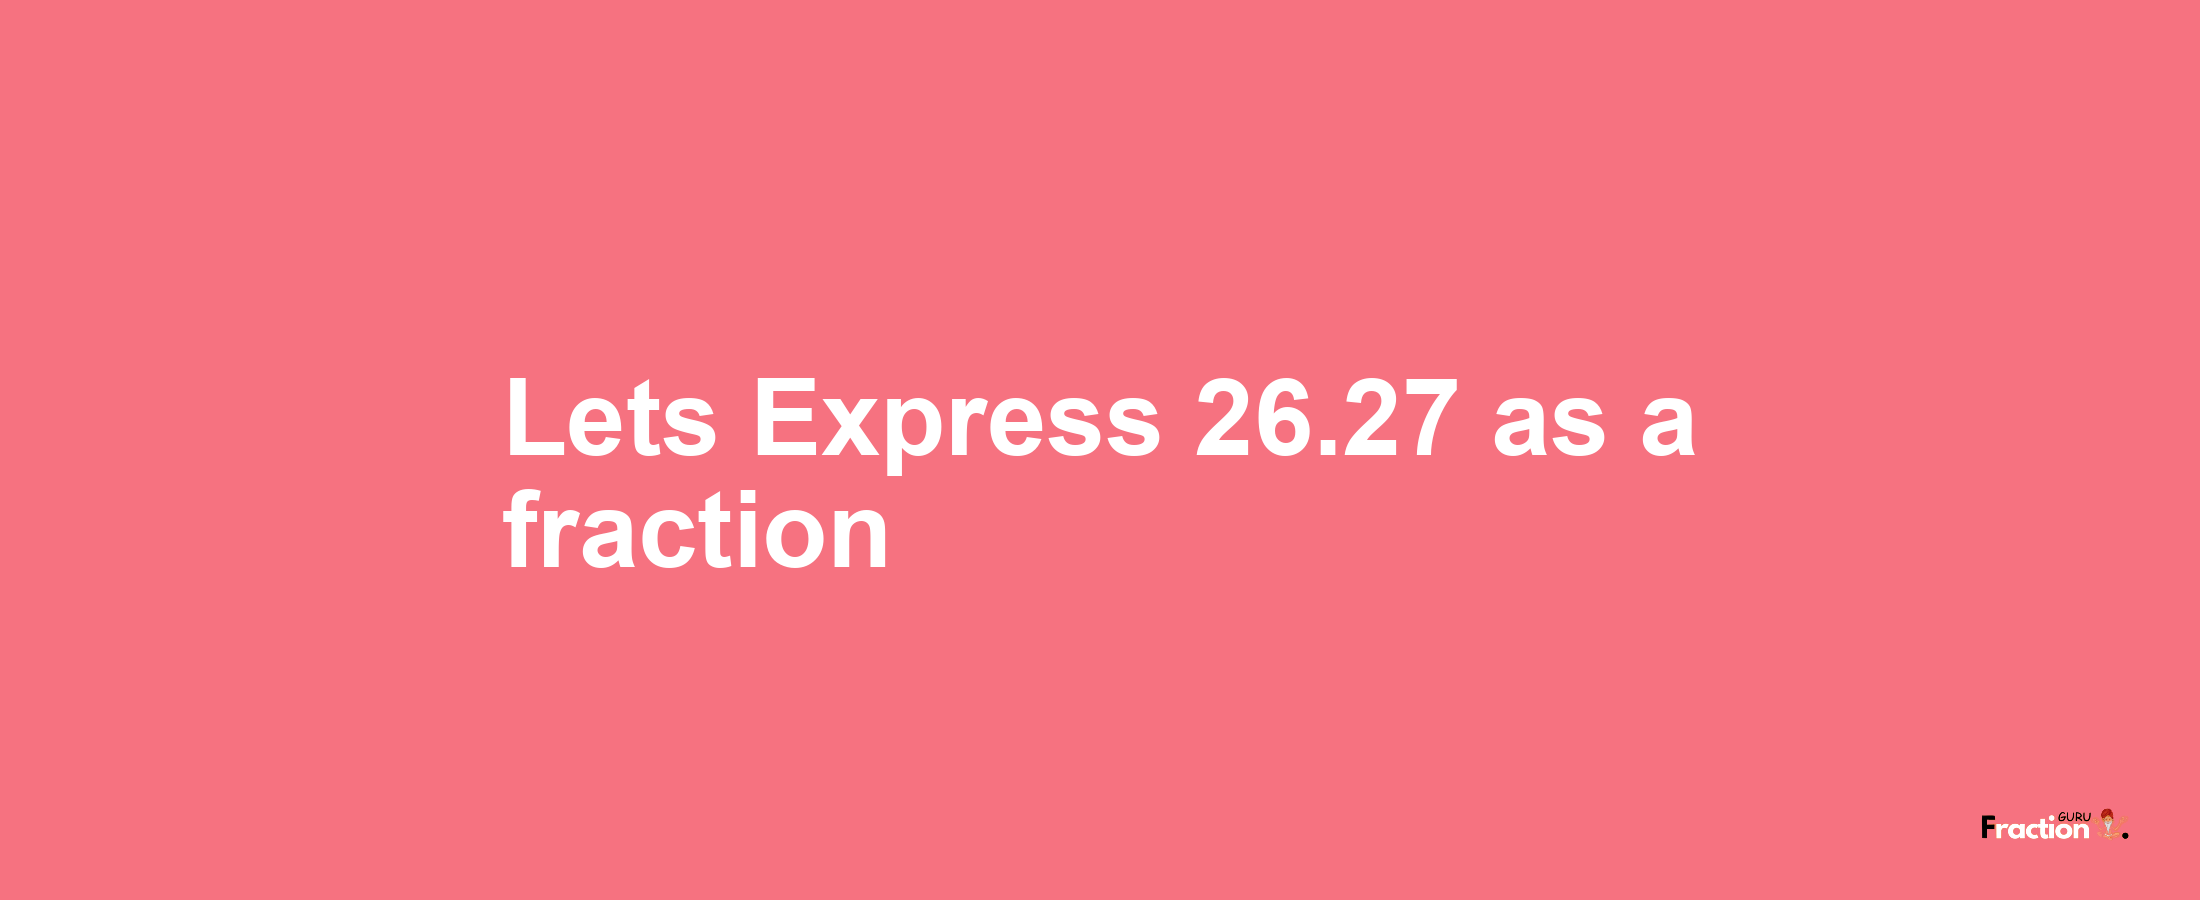 Lets Express 26.27 as afraction